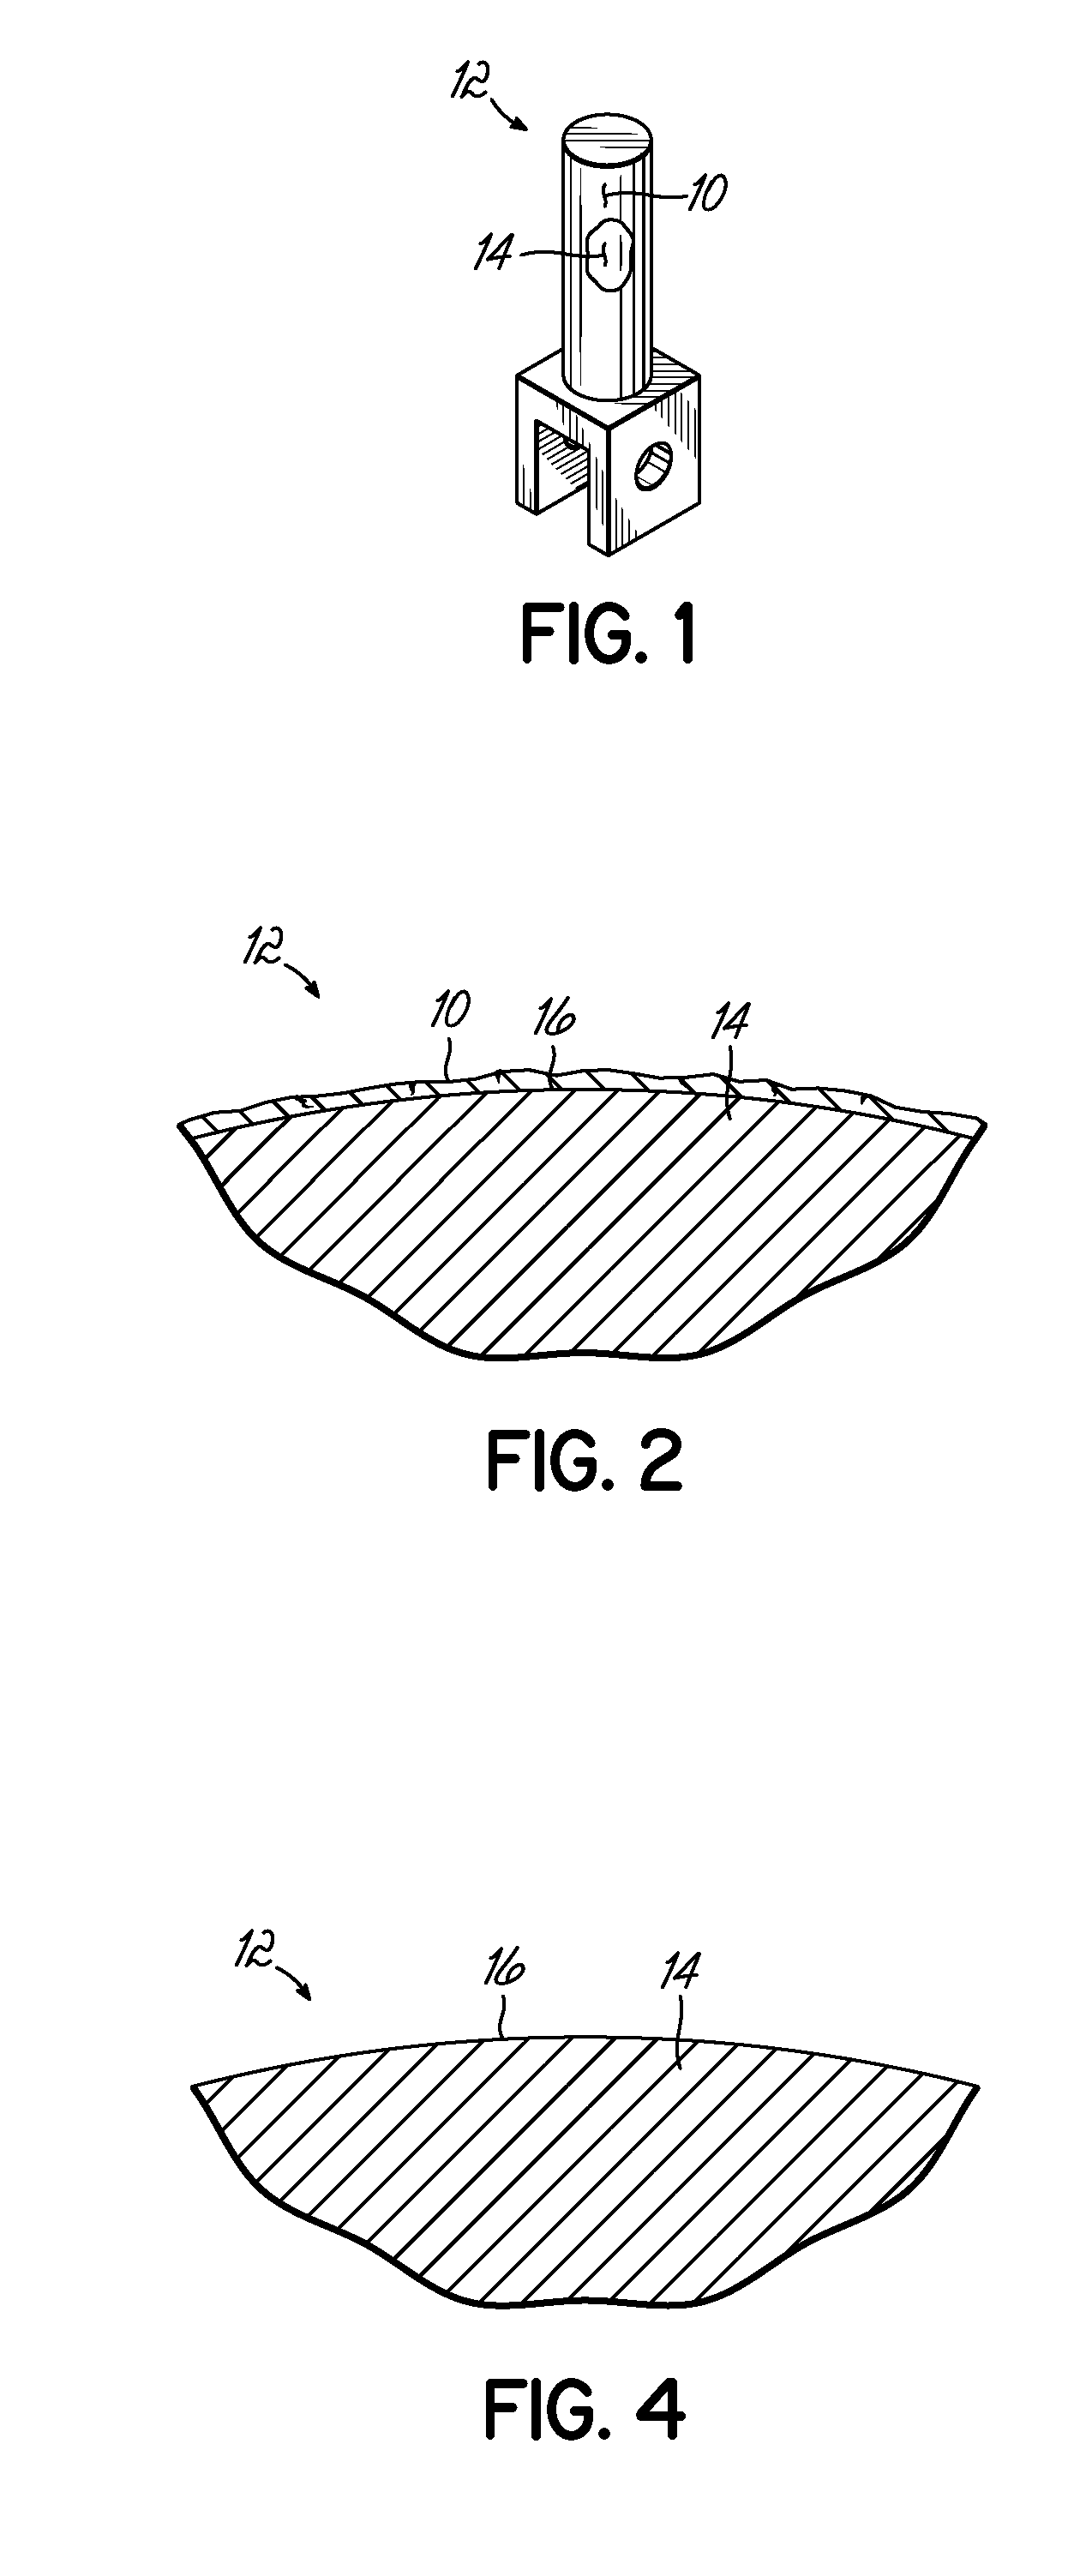 Apparatus, methods, and compositions for removing coatings from a metal component